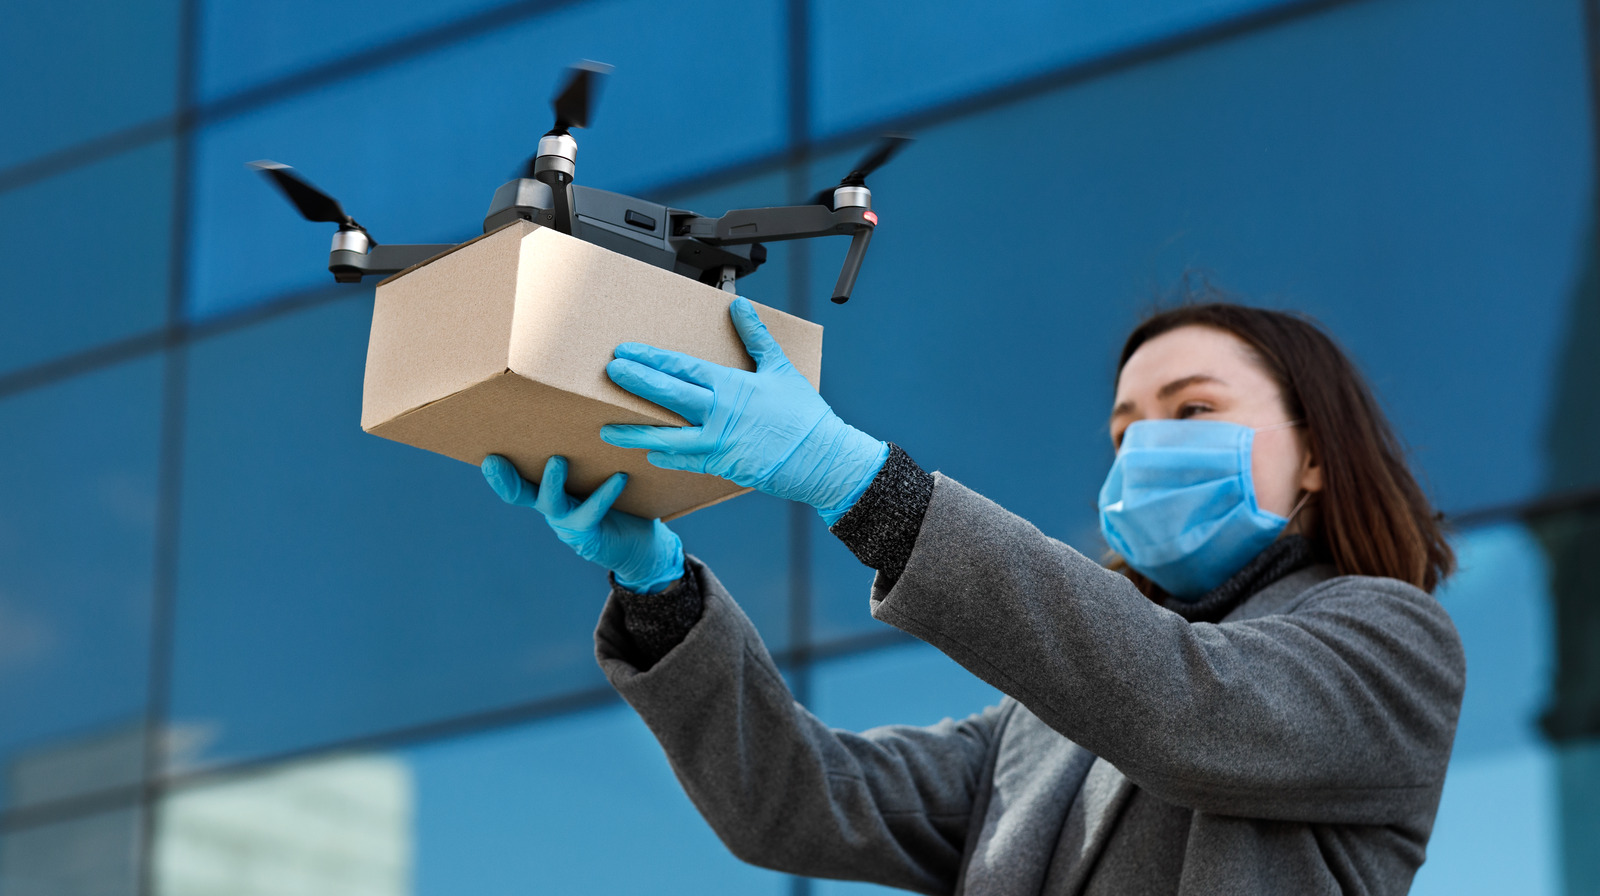 Here’s How Drones Could Change The Medical Industry – SlashGear